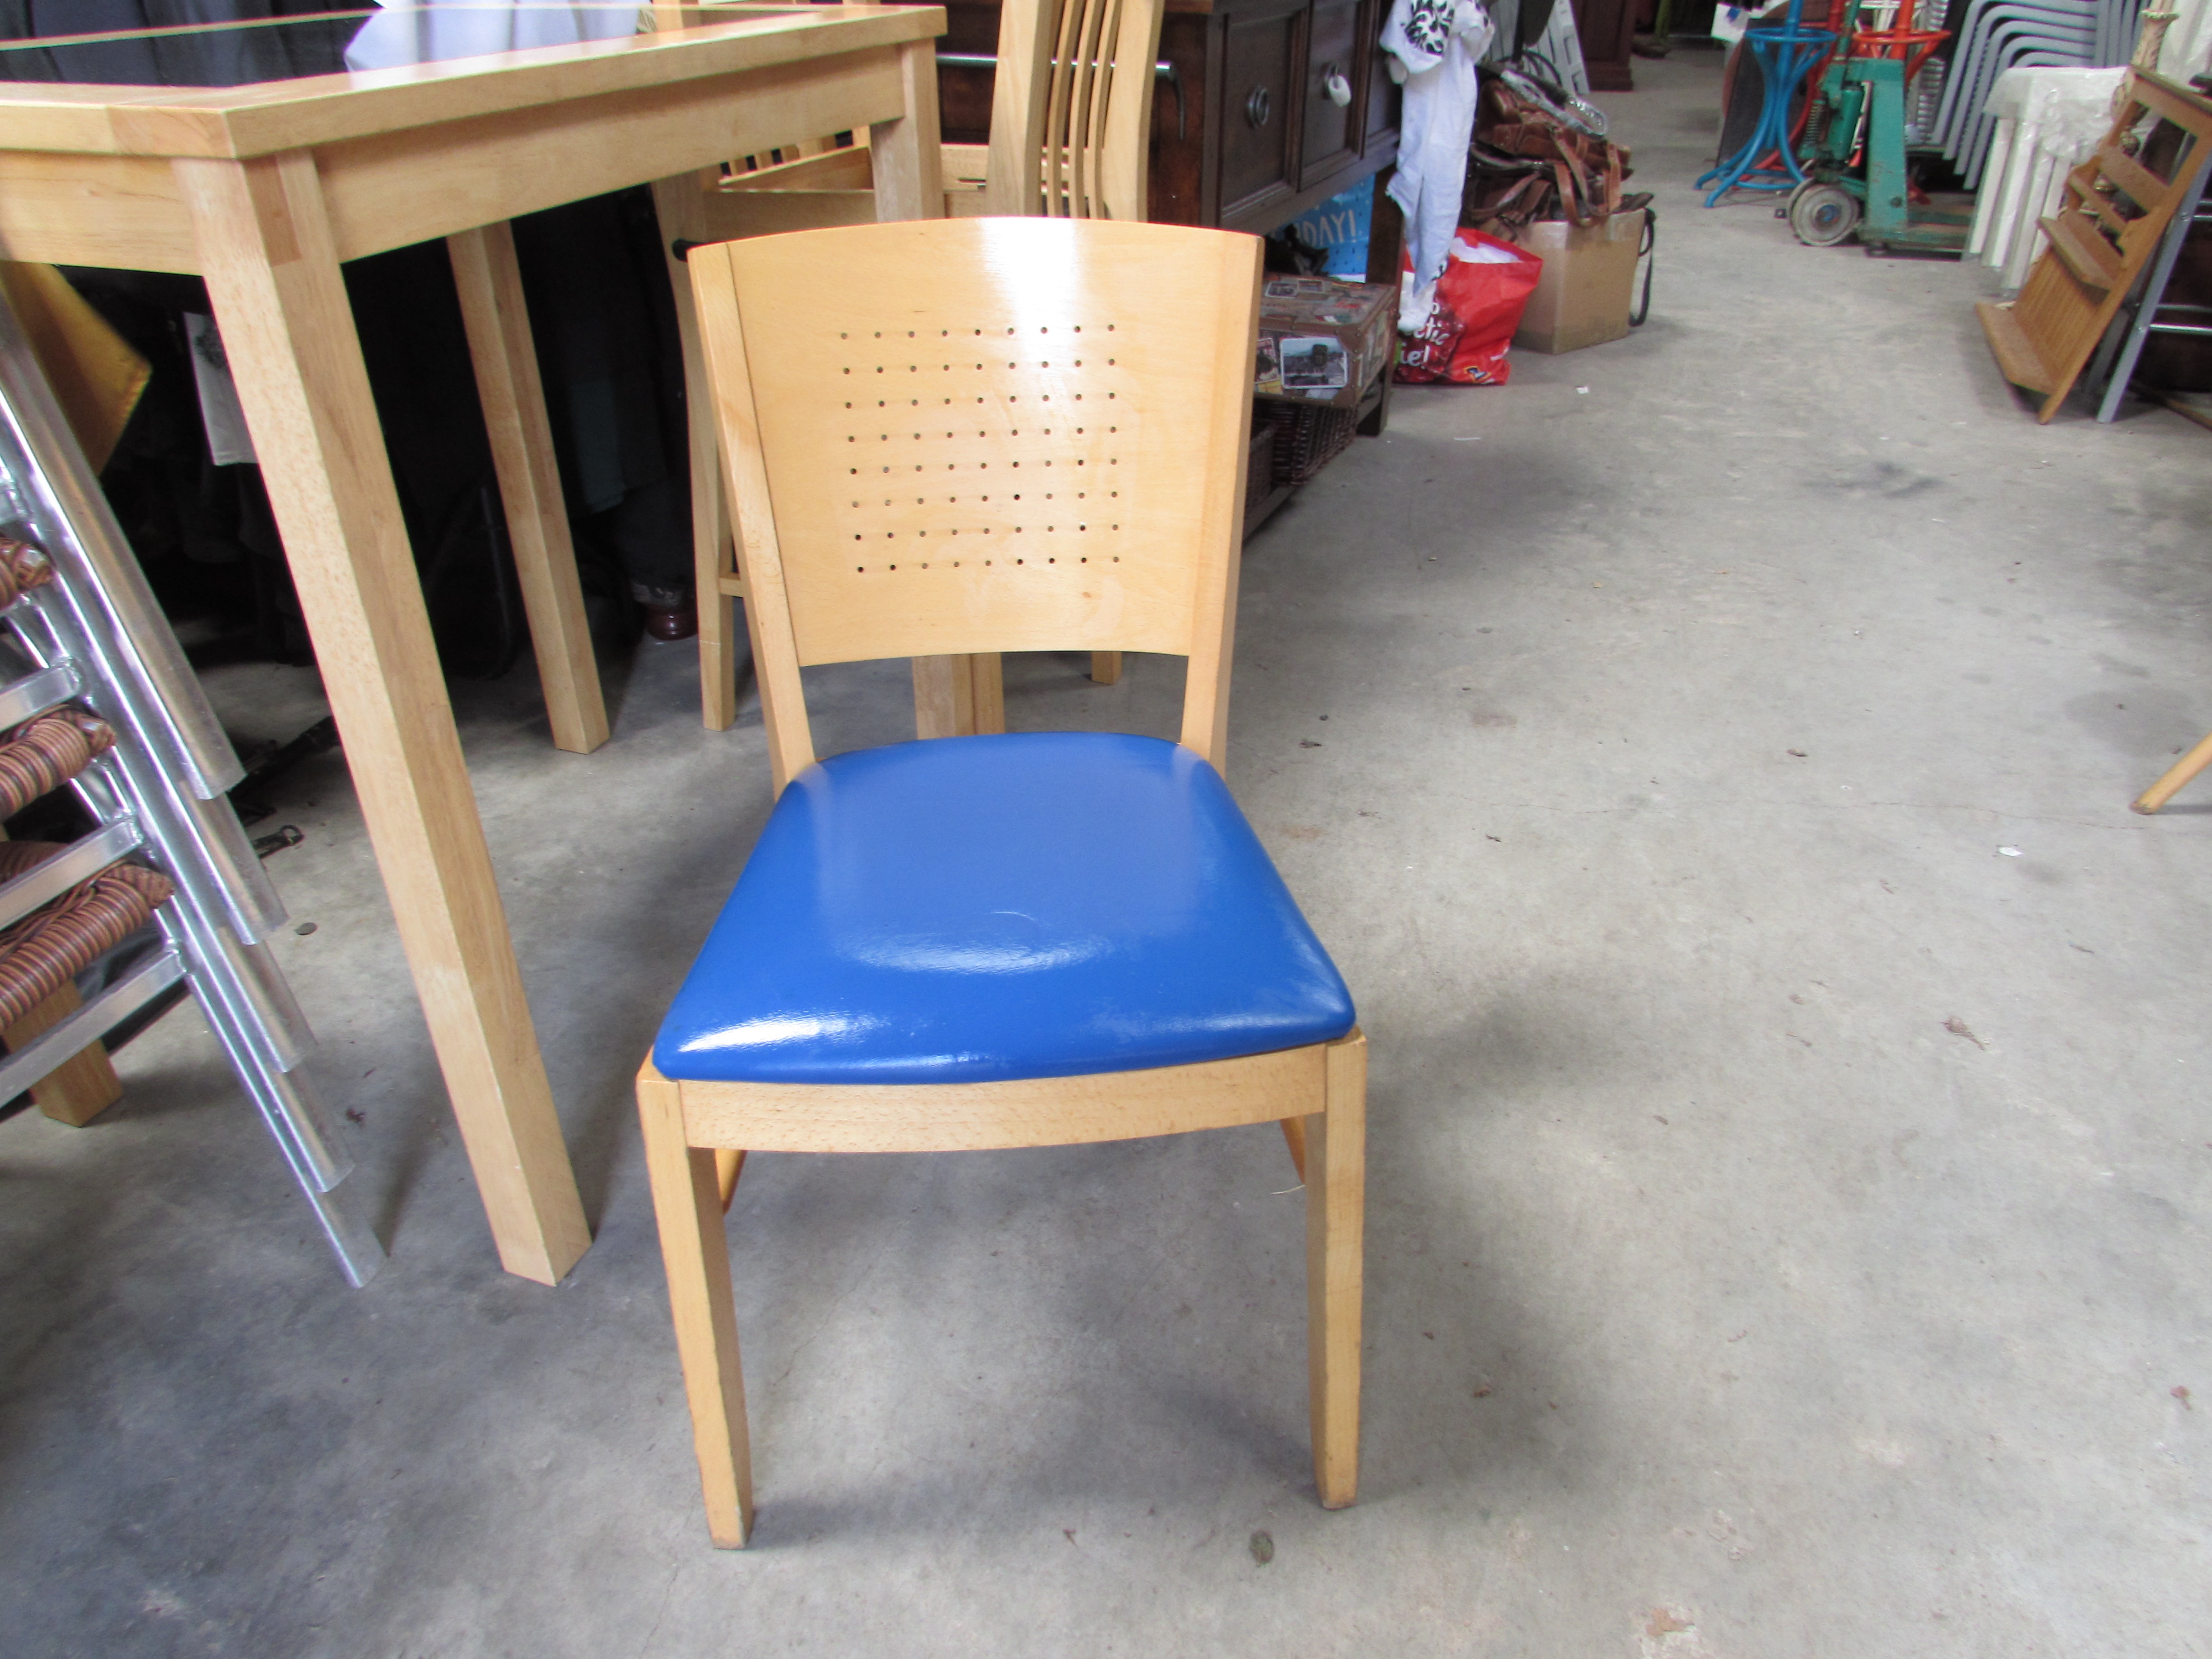 Secondhand Chairs And Tables Cafe Or Bistro Chairs 36x Morris